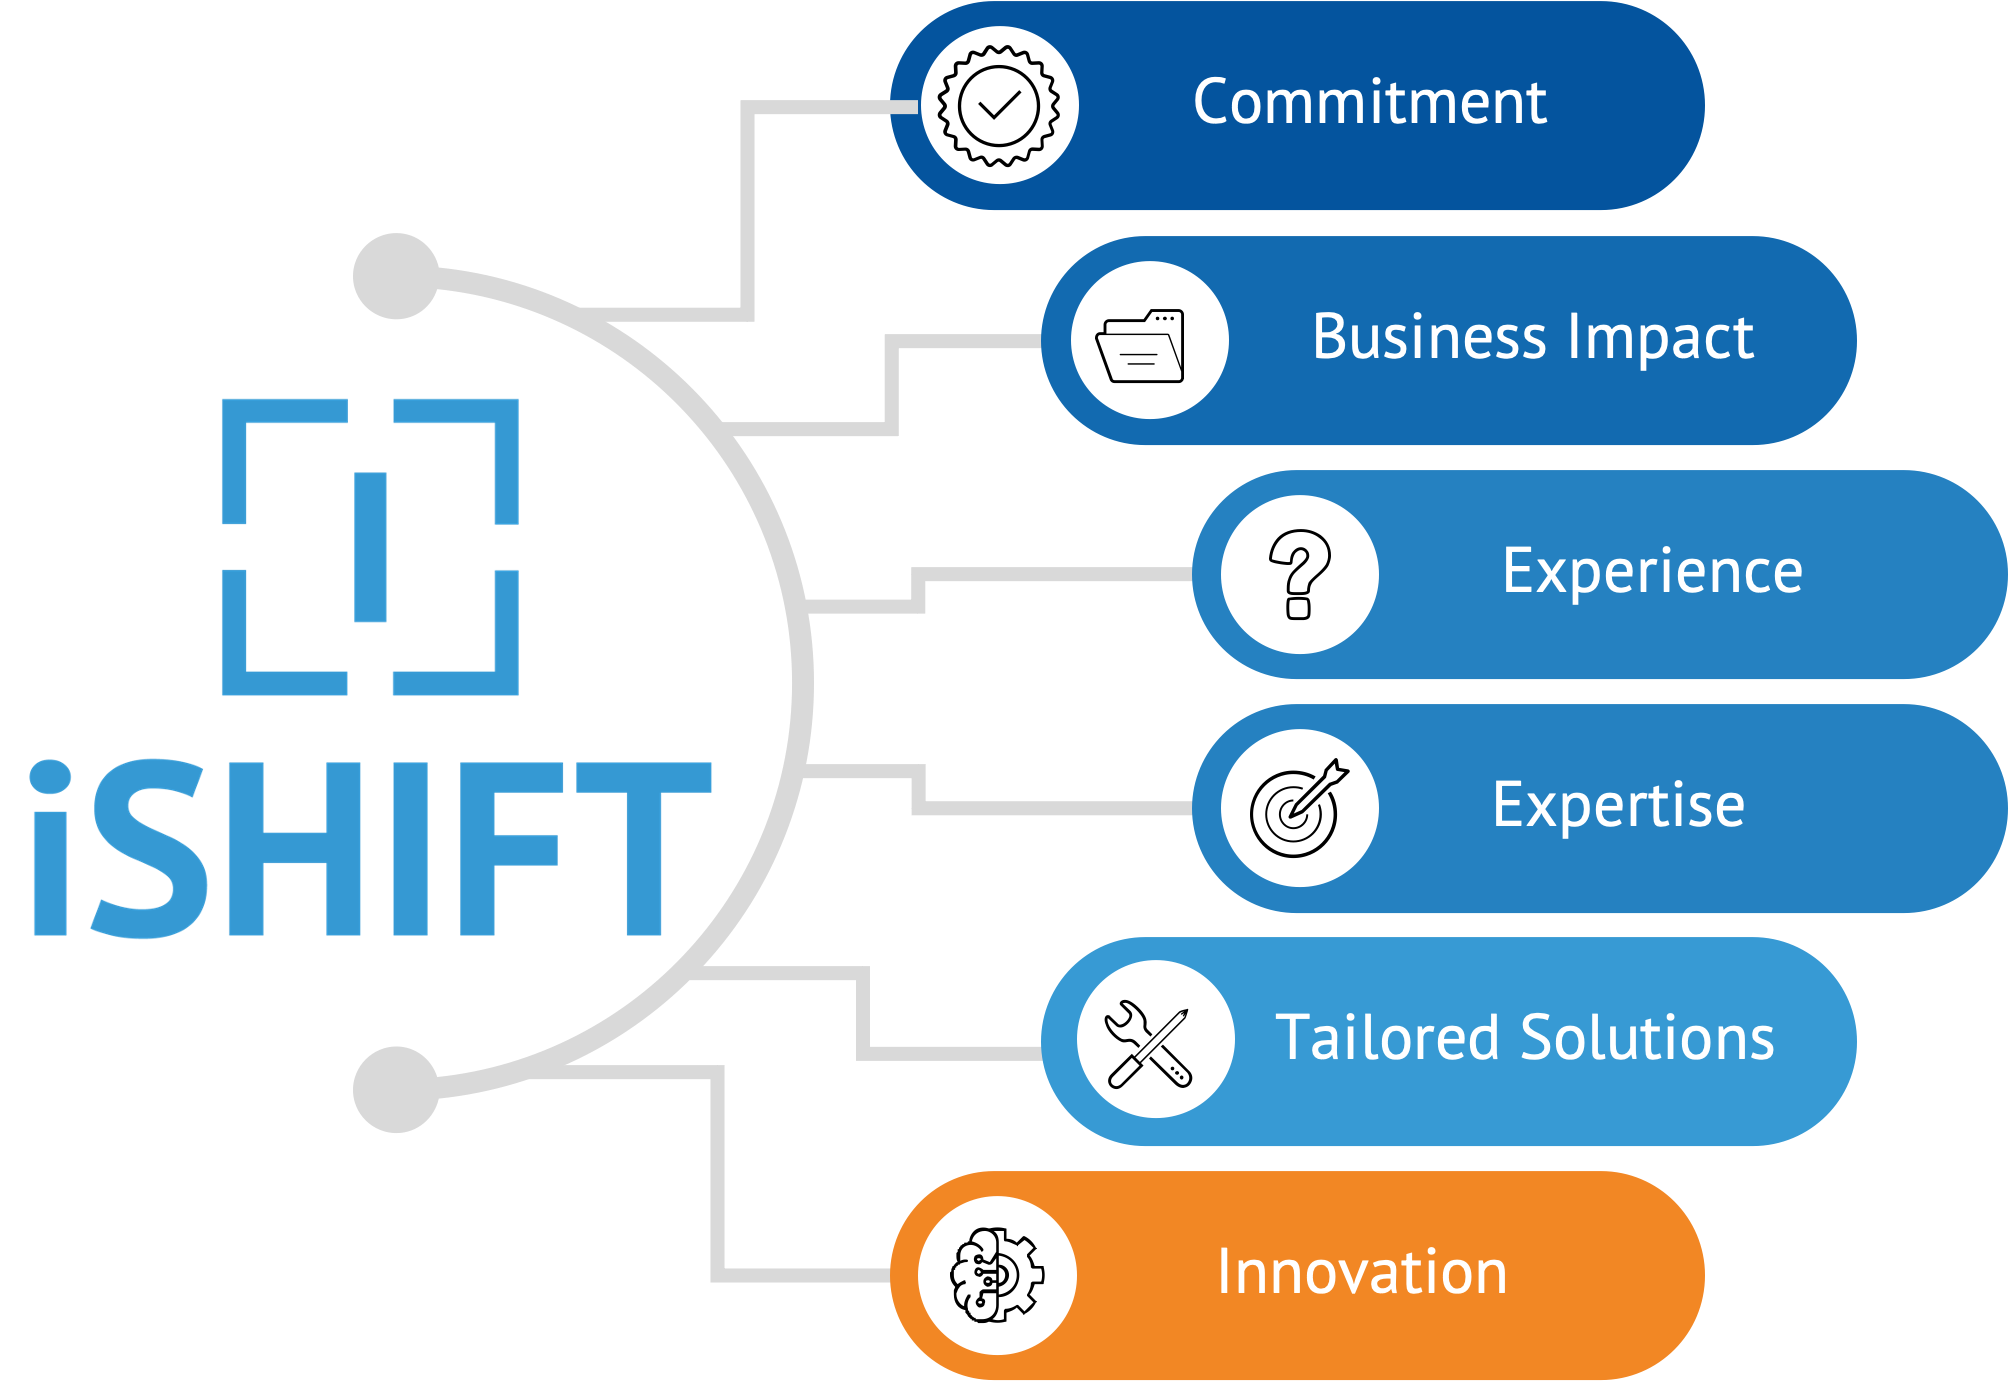 Why clients choose iShift's services and solutions